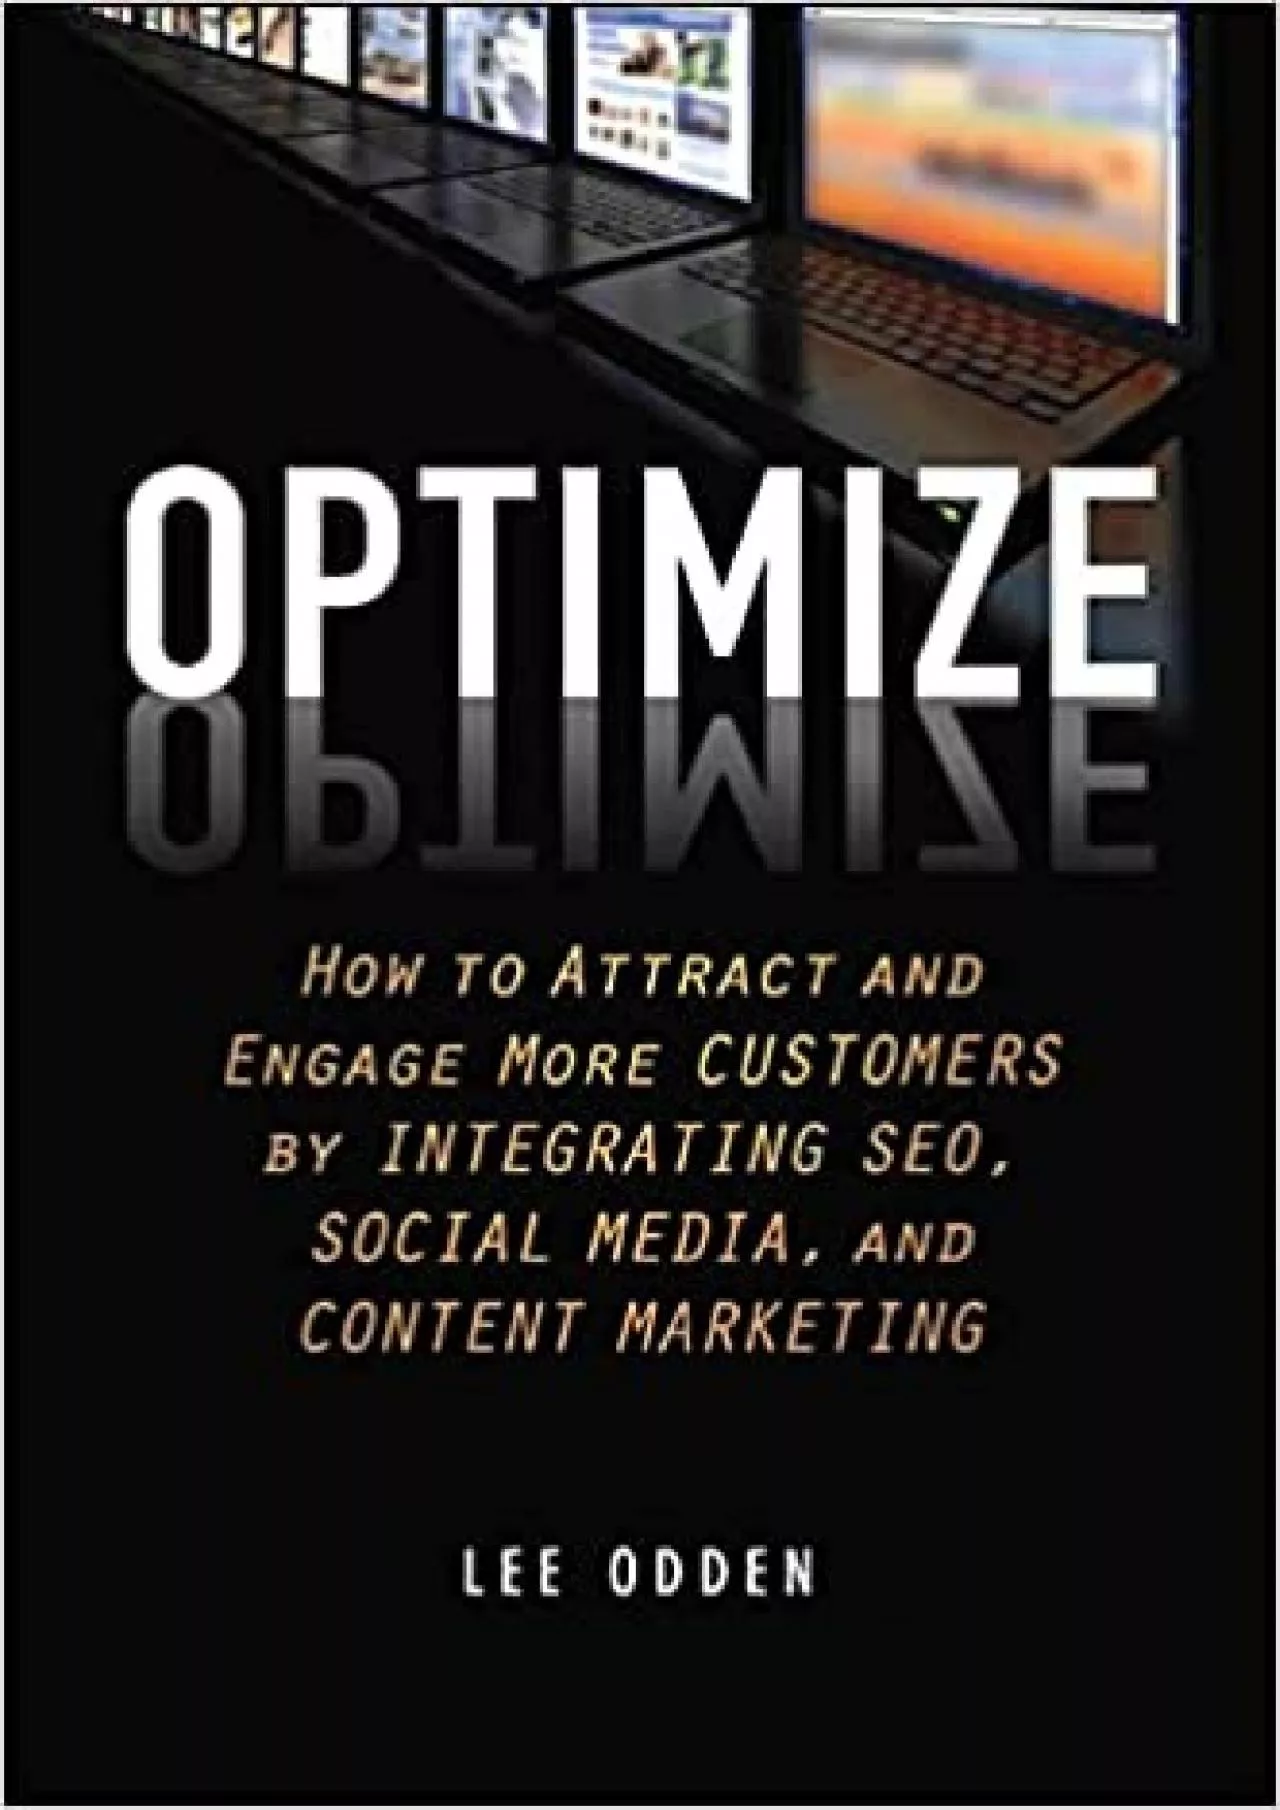 Optimize How to Attract and Engage More Customers by Integrating SEO, Social Media, and